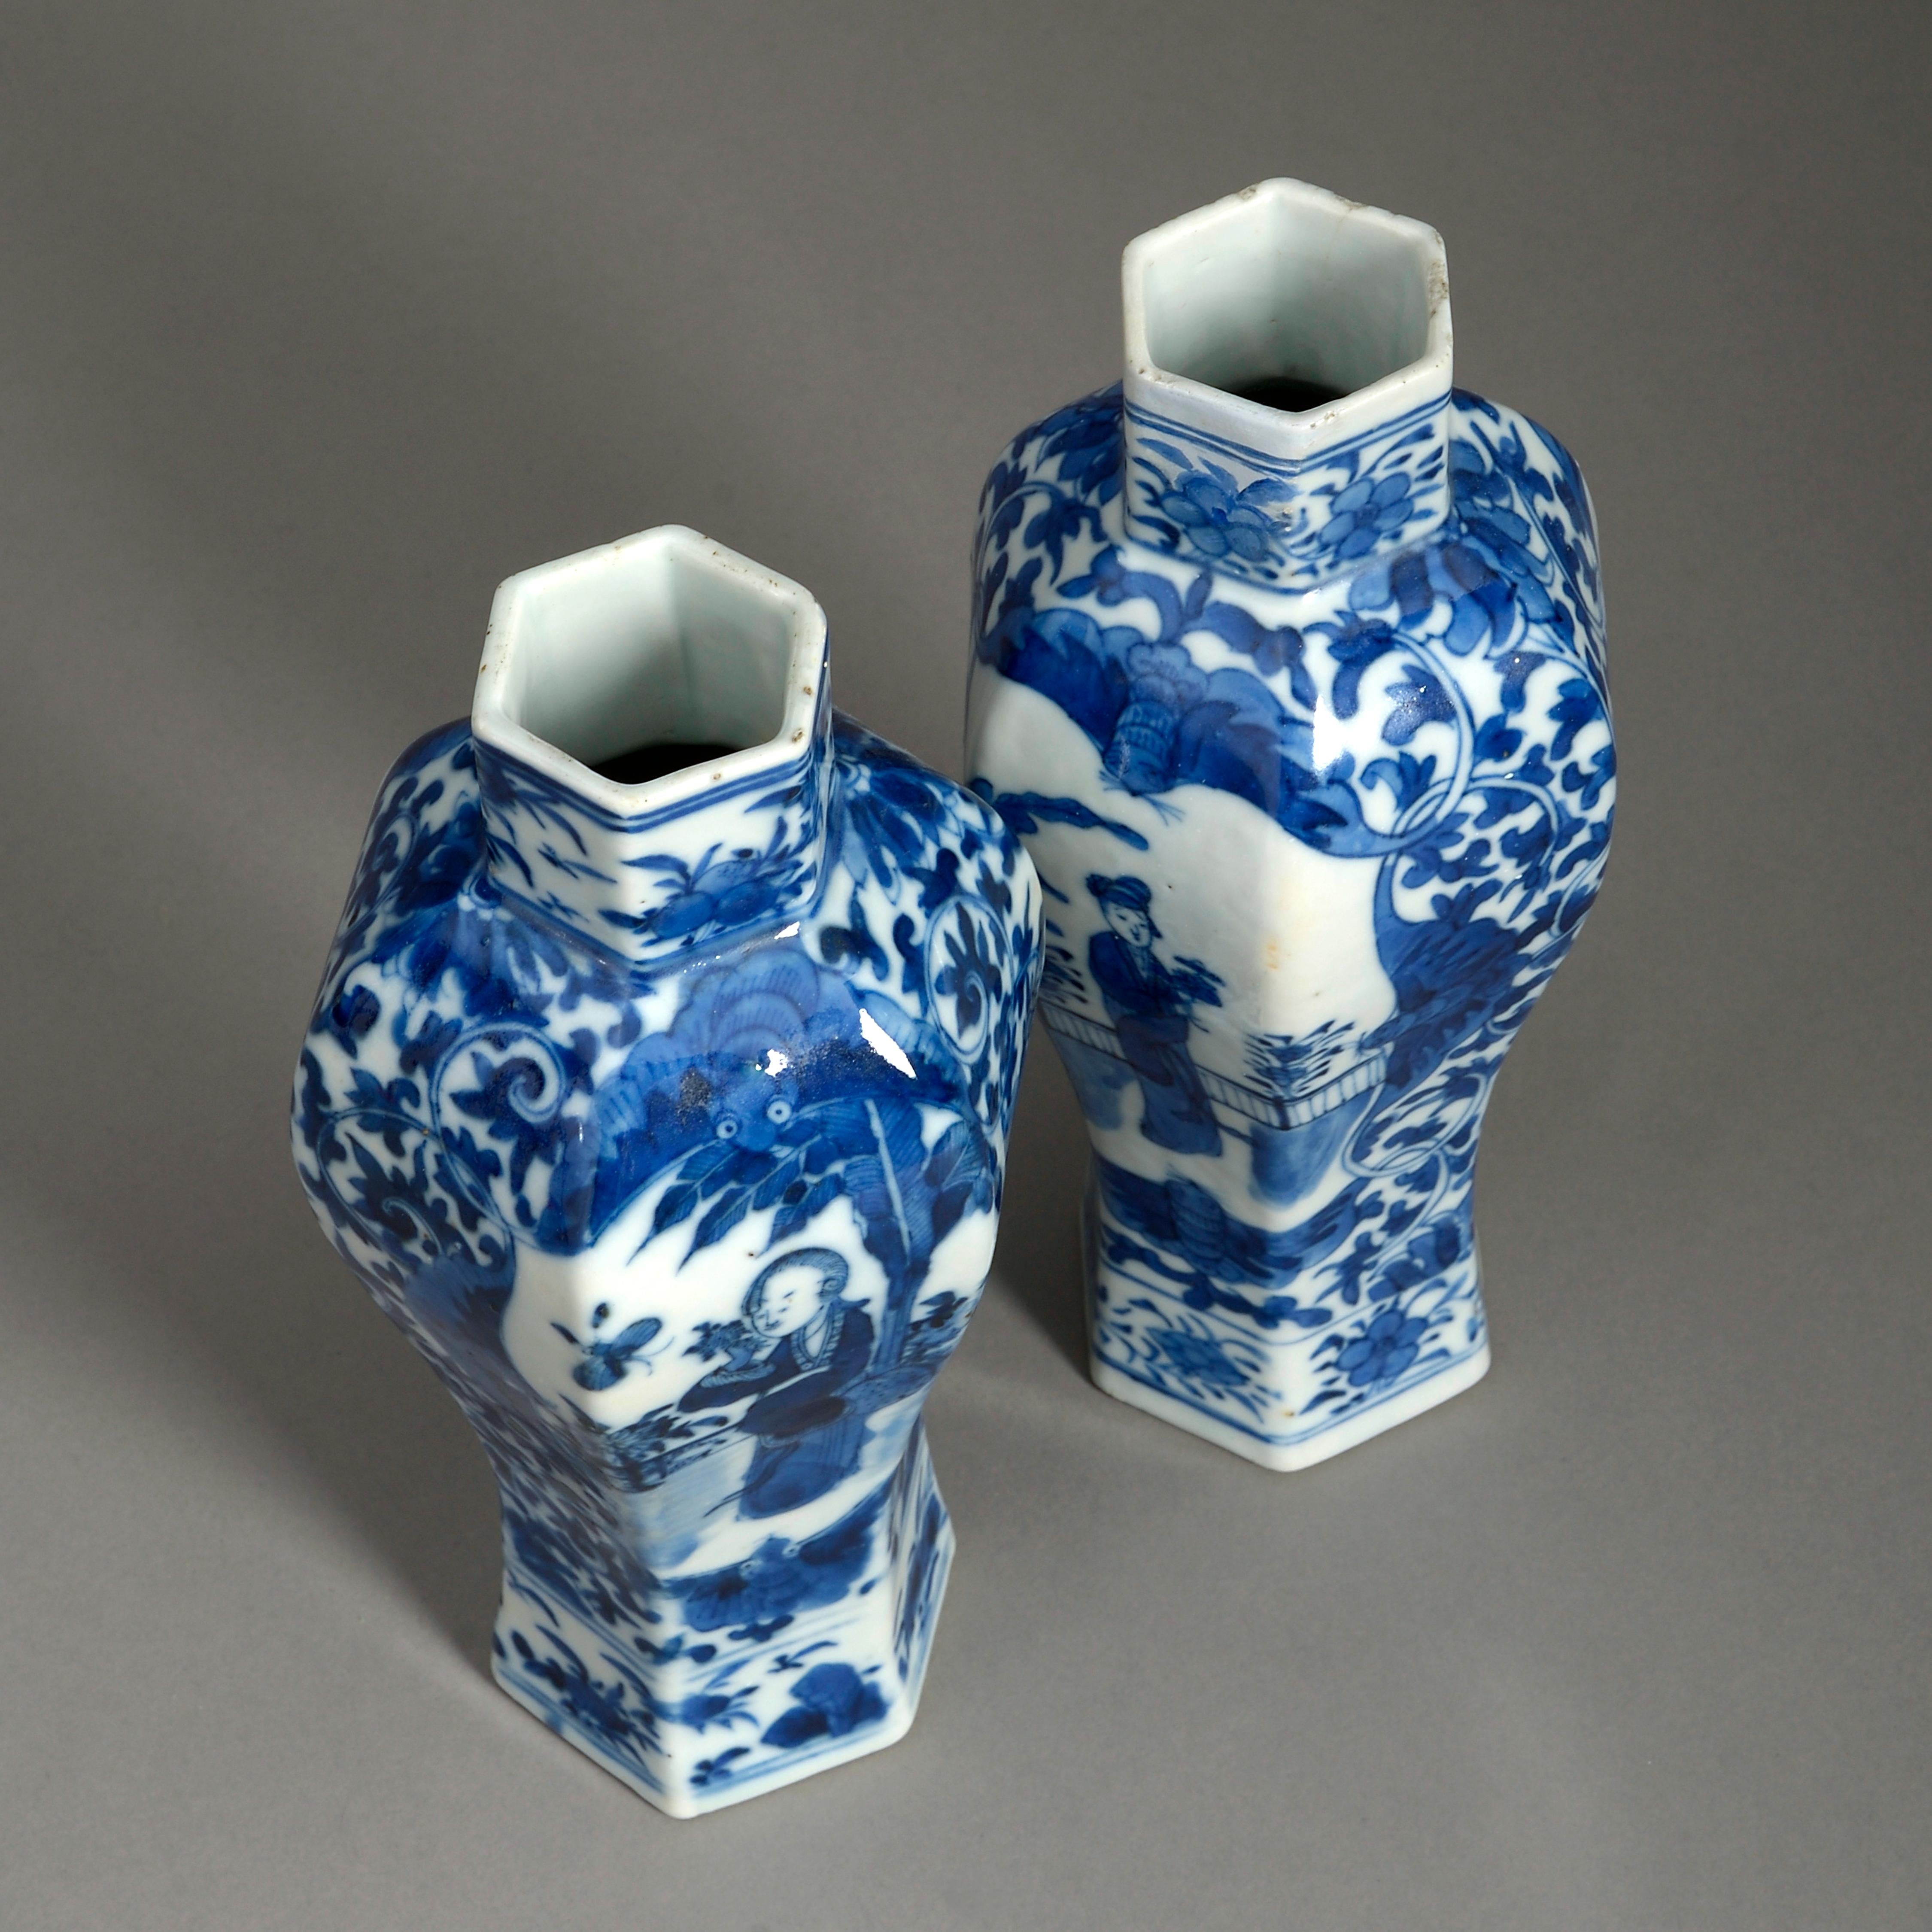 Chinese Export Pair of 19th Century Blue and White Porcelain Vases